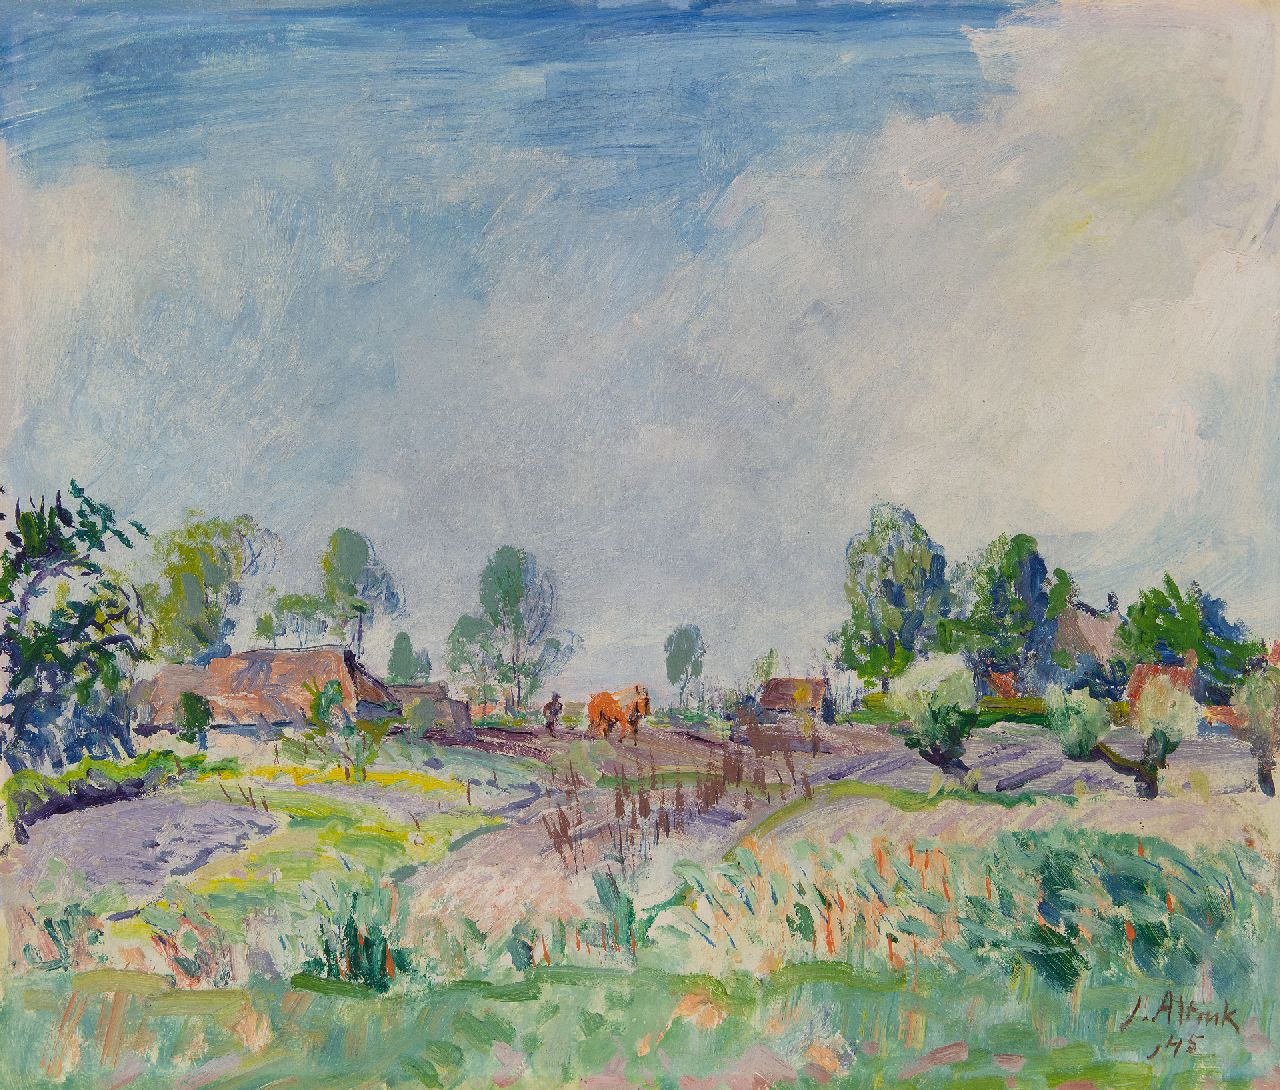 Altink J.  | Jan Altink, A view of the village Essen, Groningen, oil on canvas 51.9 x 60.8 cm, signed l.r. and dated '45